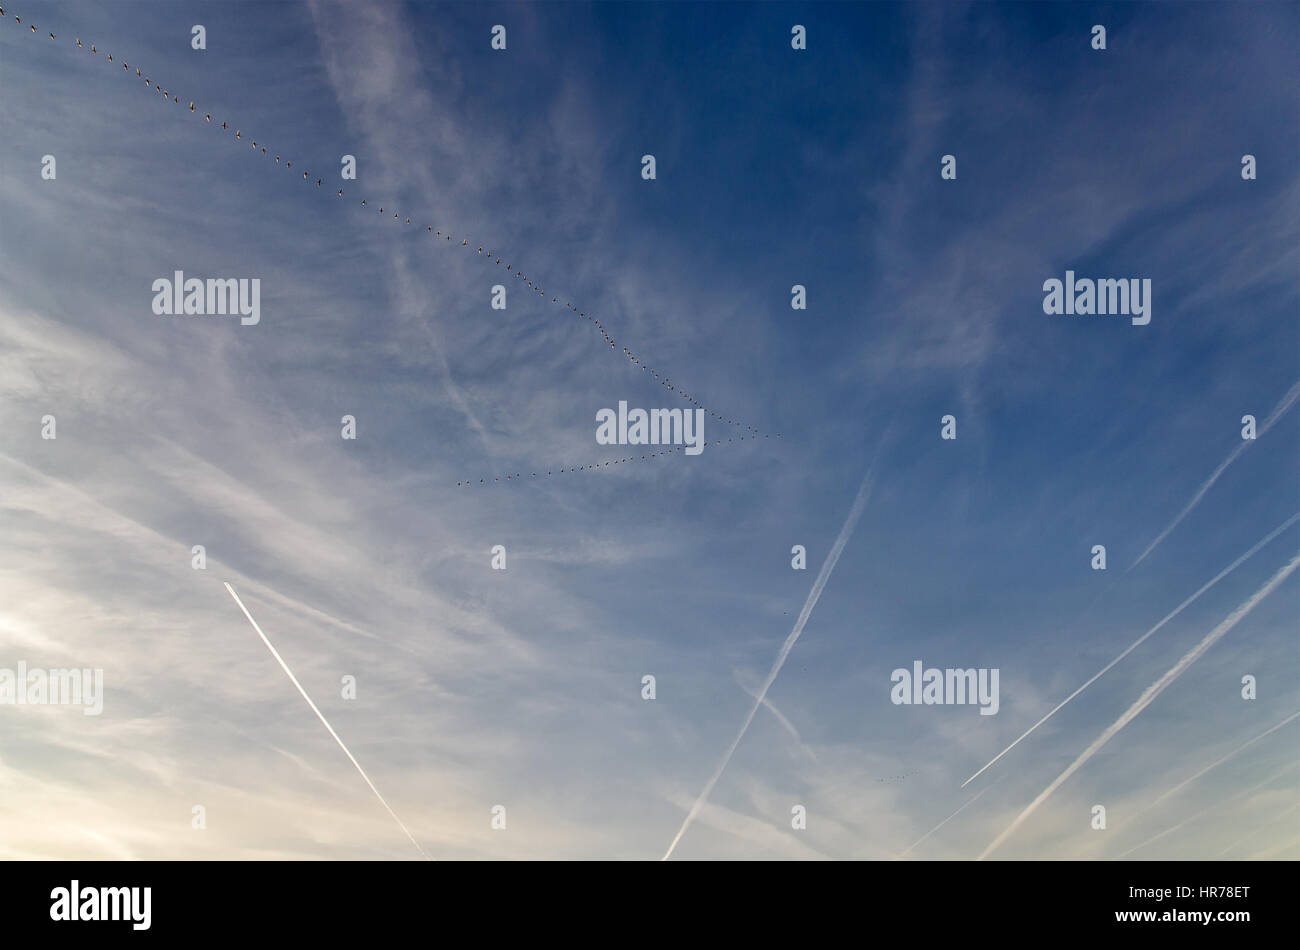 Flock of birds flying in the sky crossing jet trails. Stock Photo